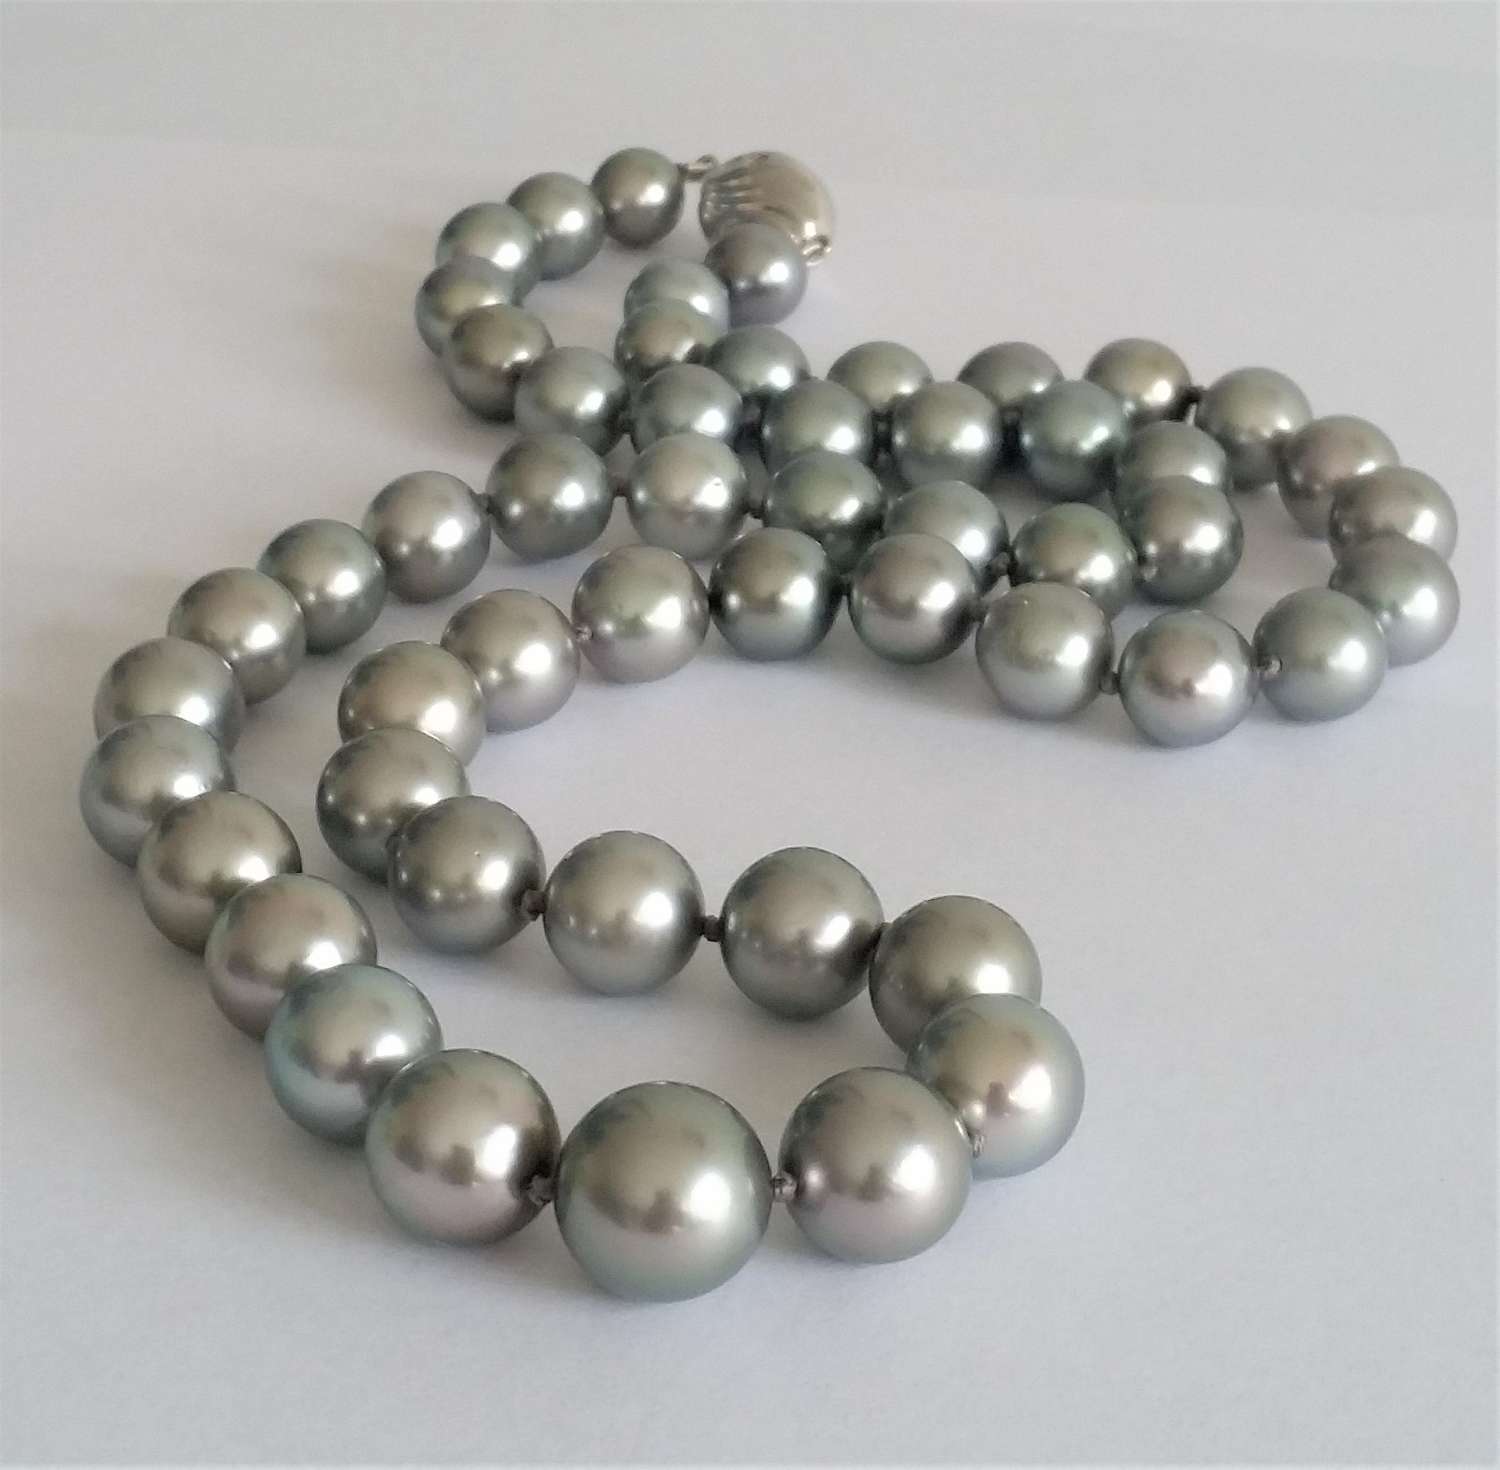 A row of Tahitian cultured pearls